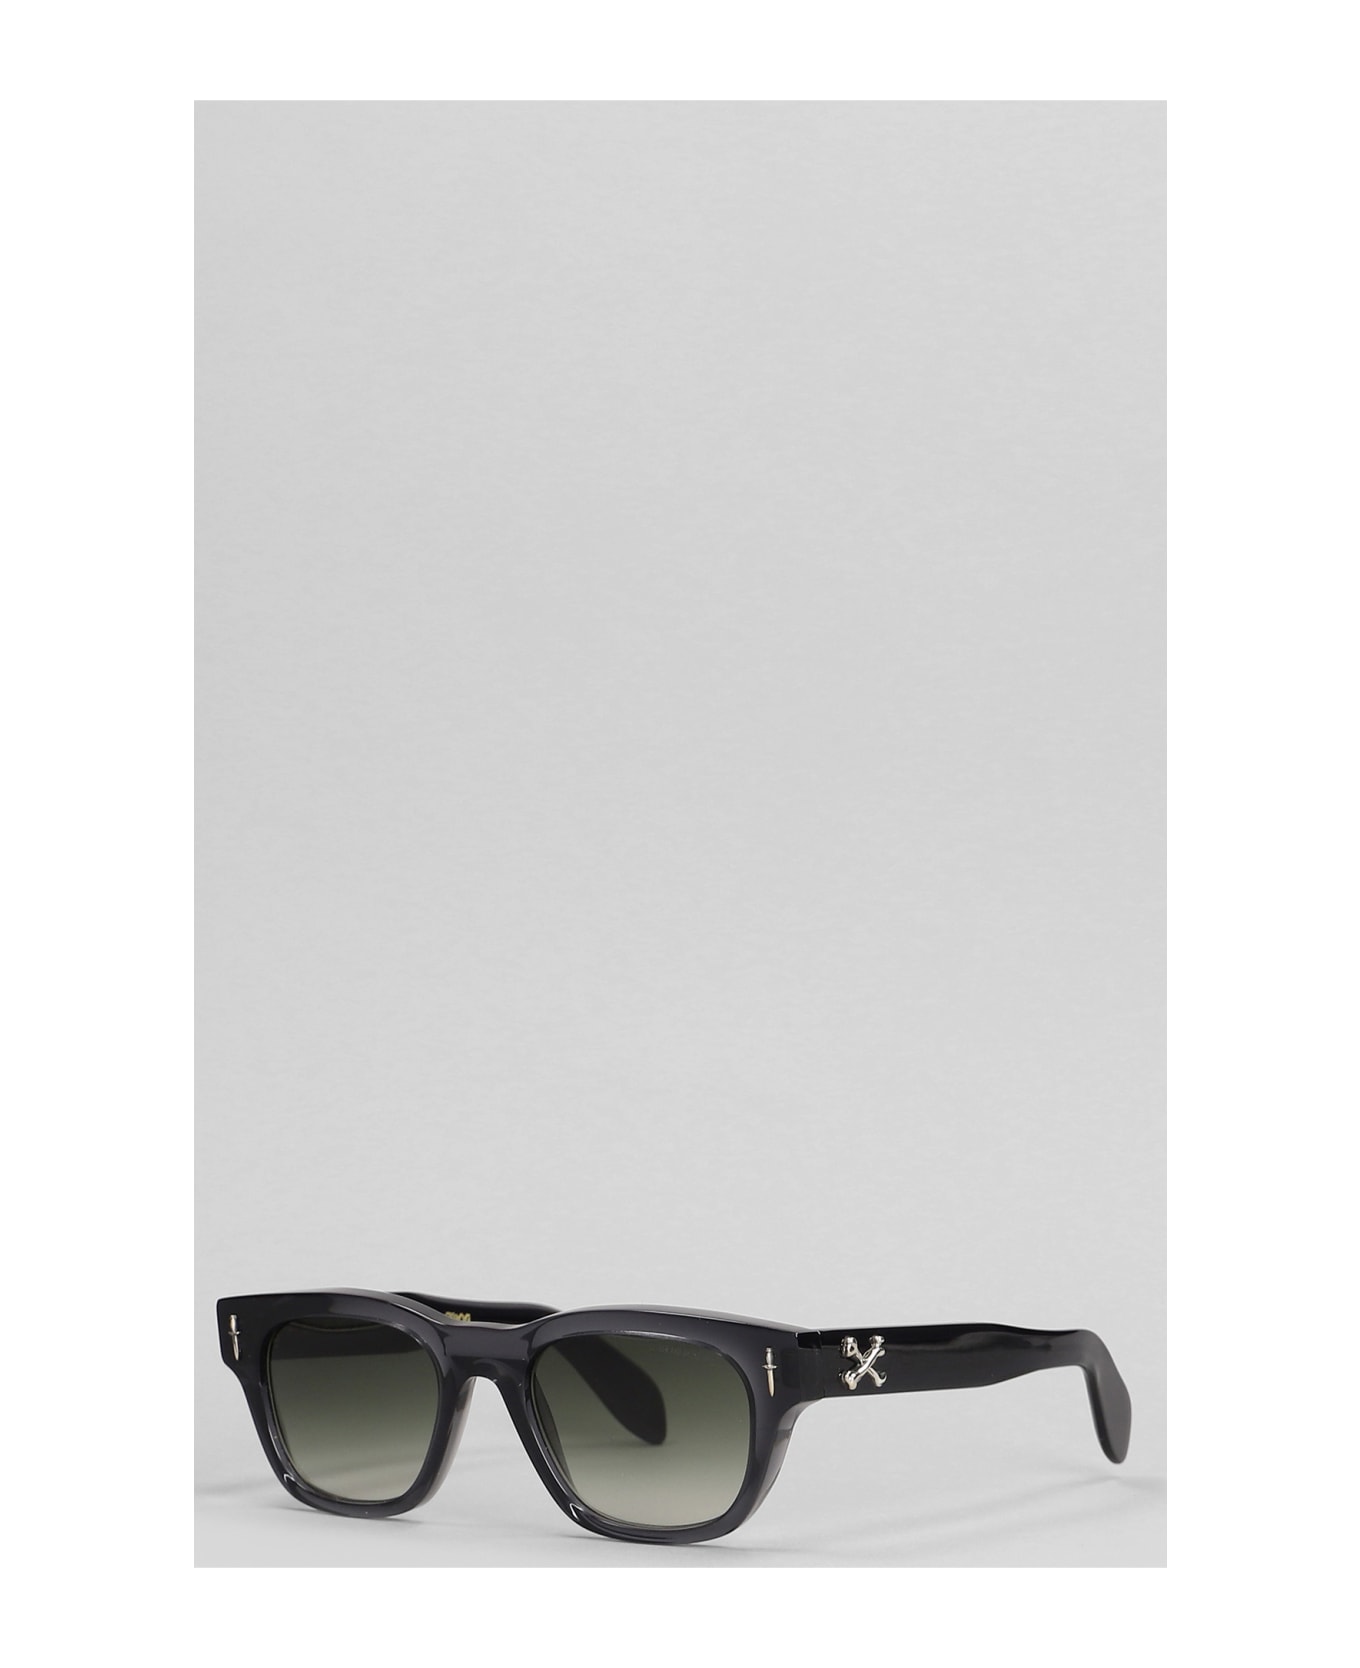 Cutler and Gross The Great Frog Sunglasses In Grey Acetate - grey